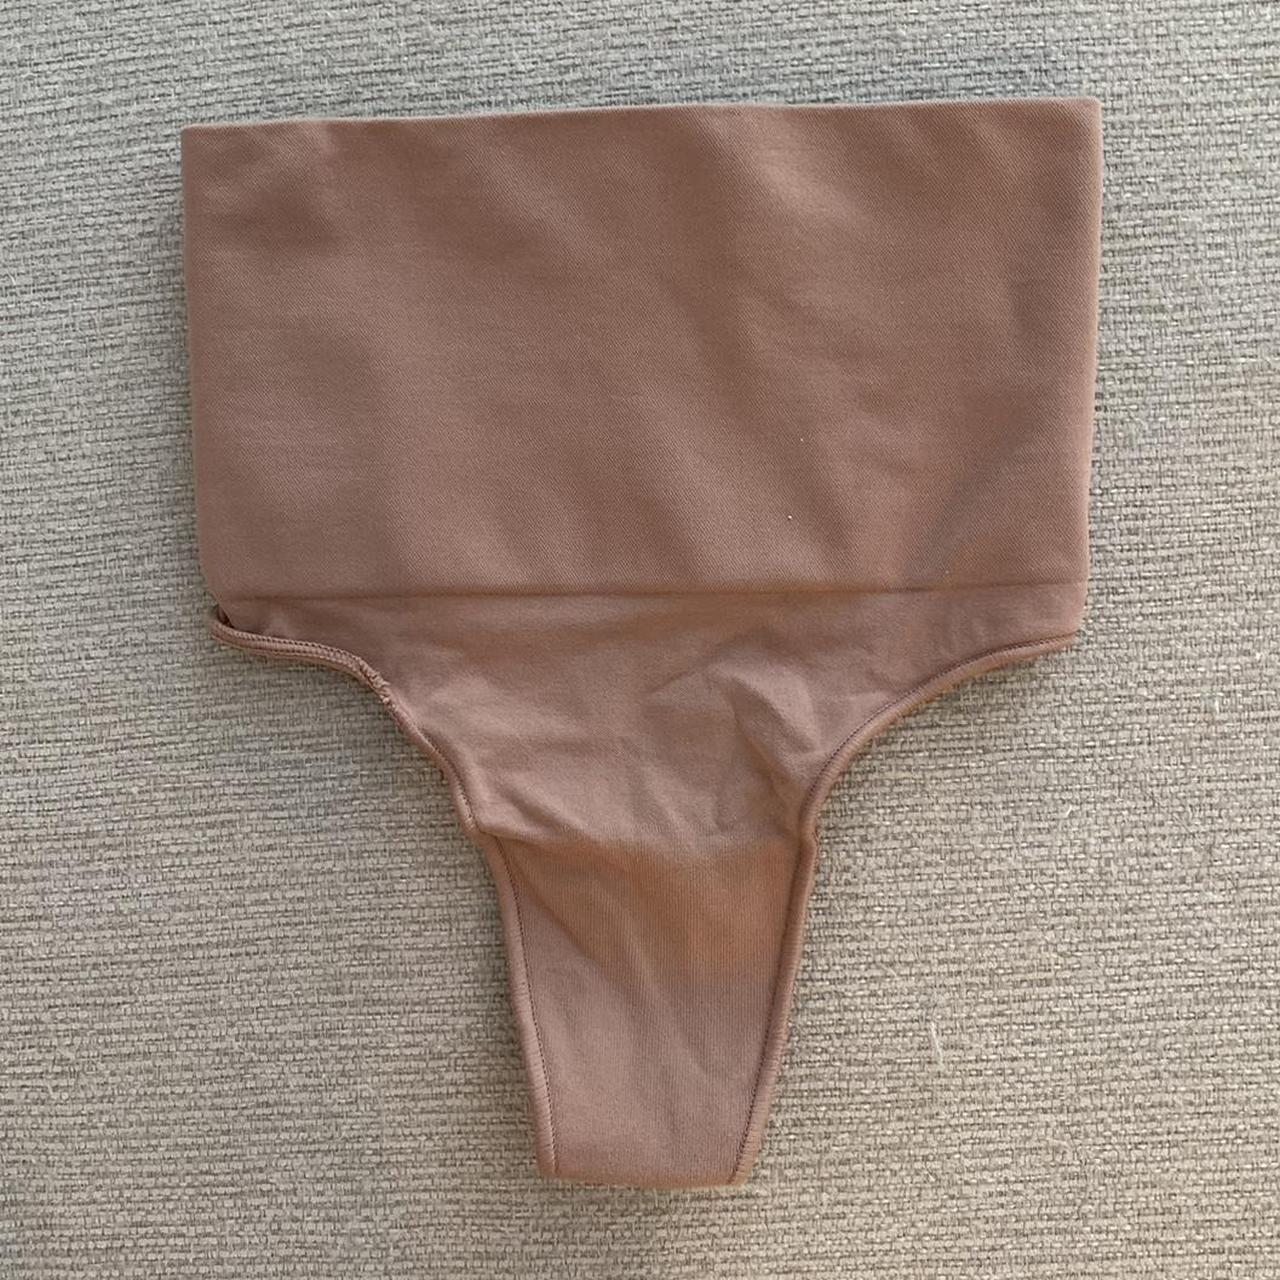 CORE CONTROL HIGH-WAISTED THONG